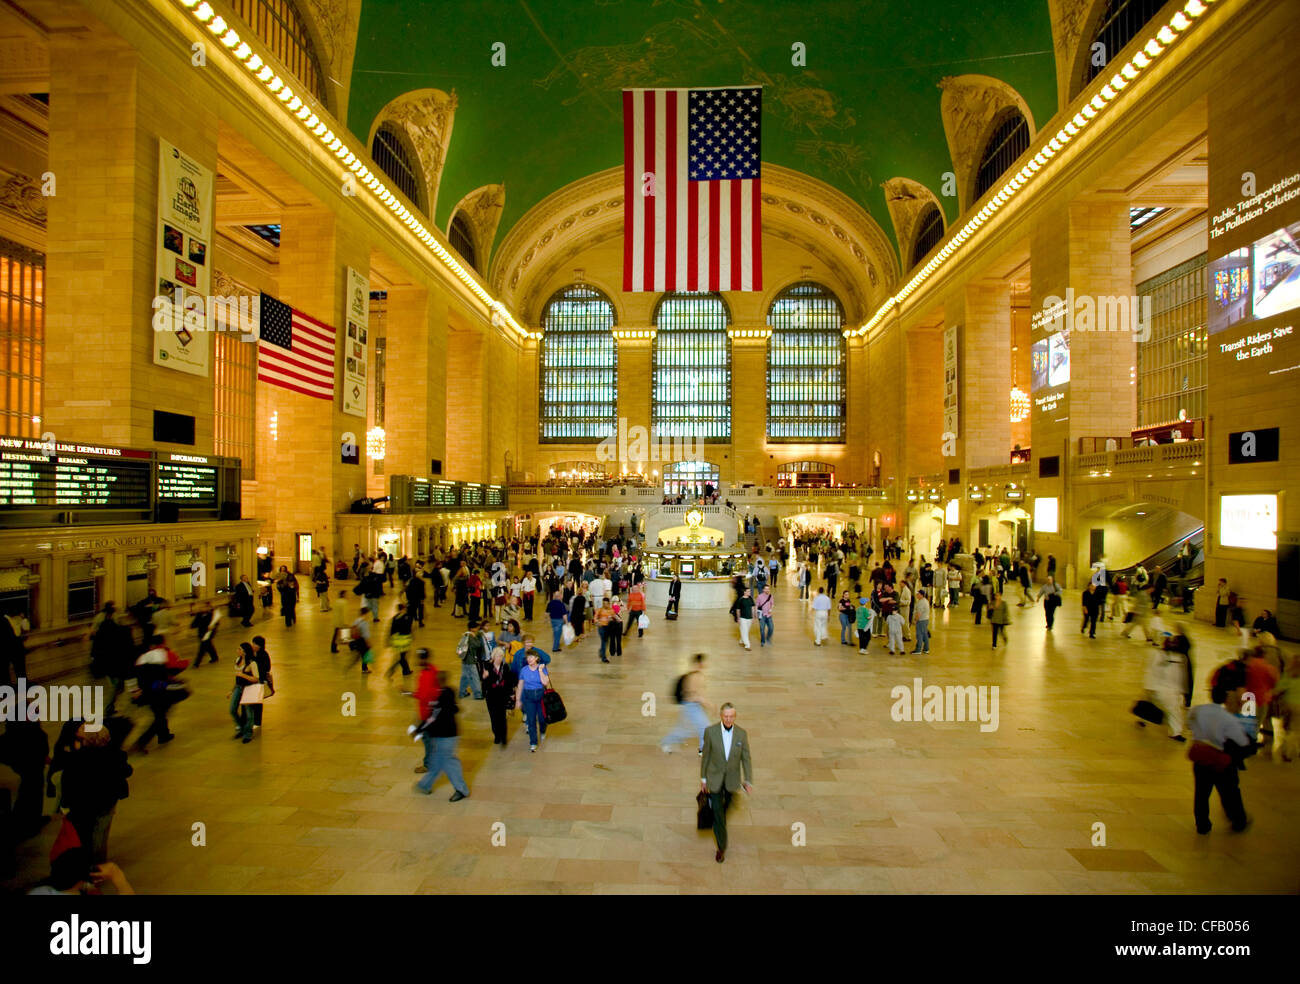 View of people in Grand Central Station, New York City. Stock Photo